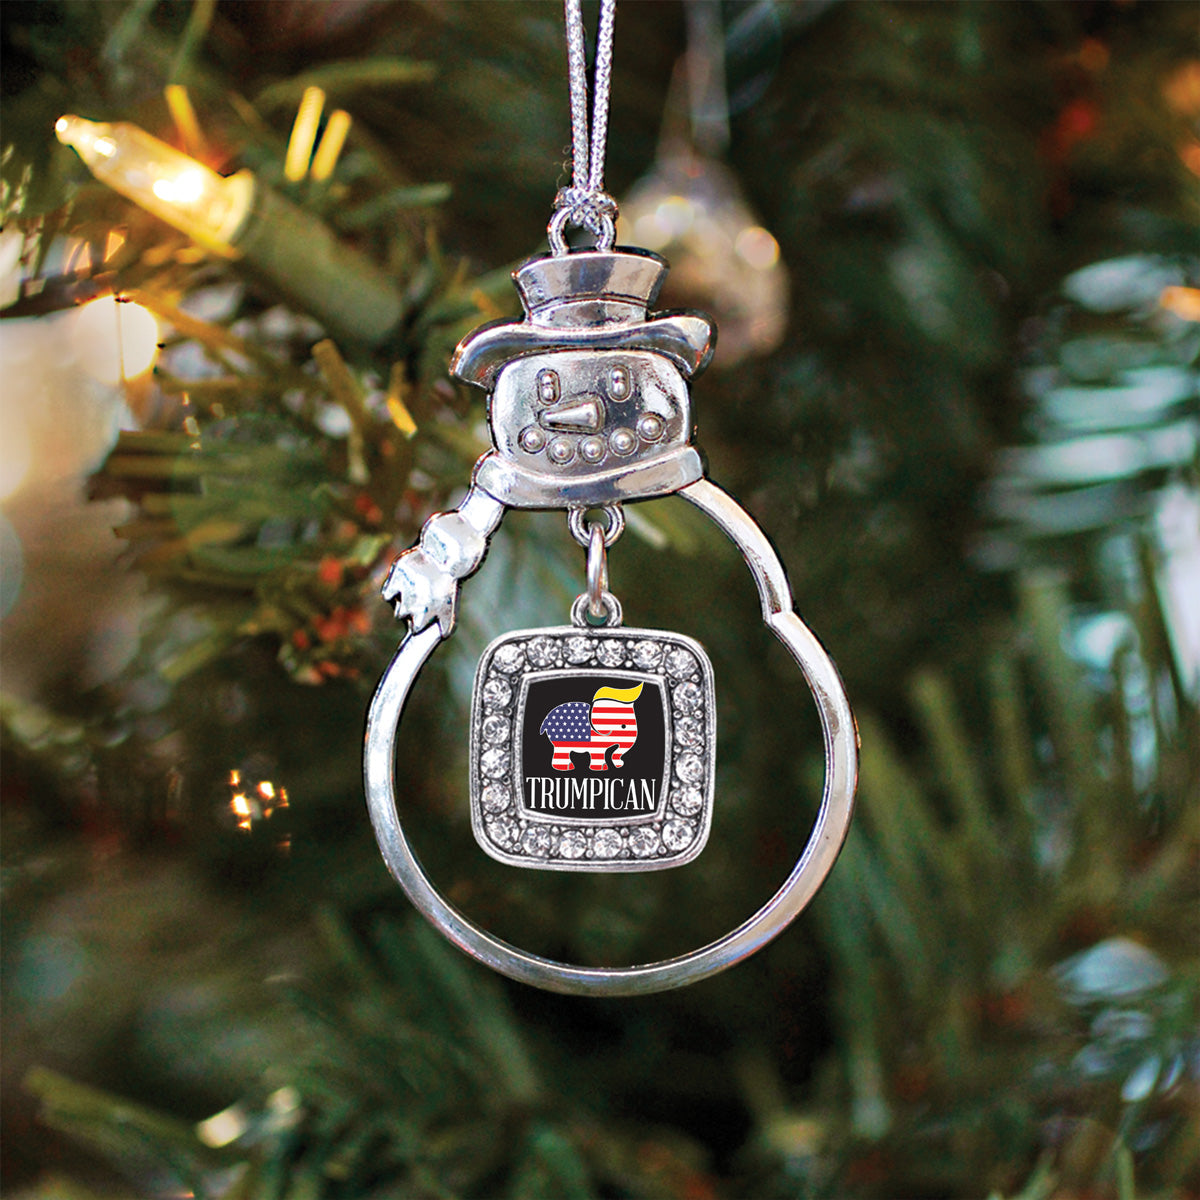 Trumpican Square Charm Christmas / Holiday Ornament